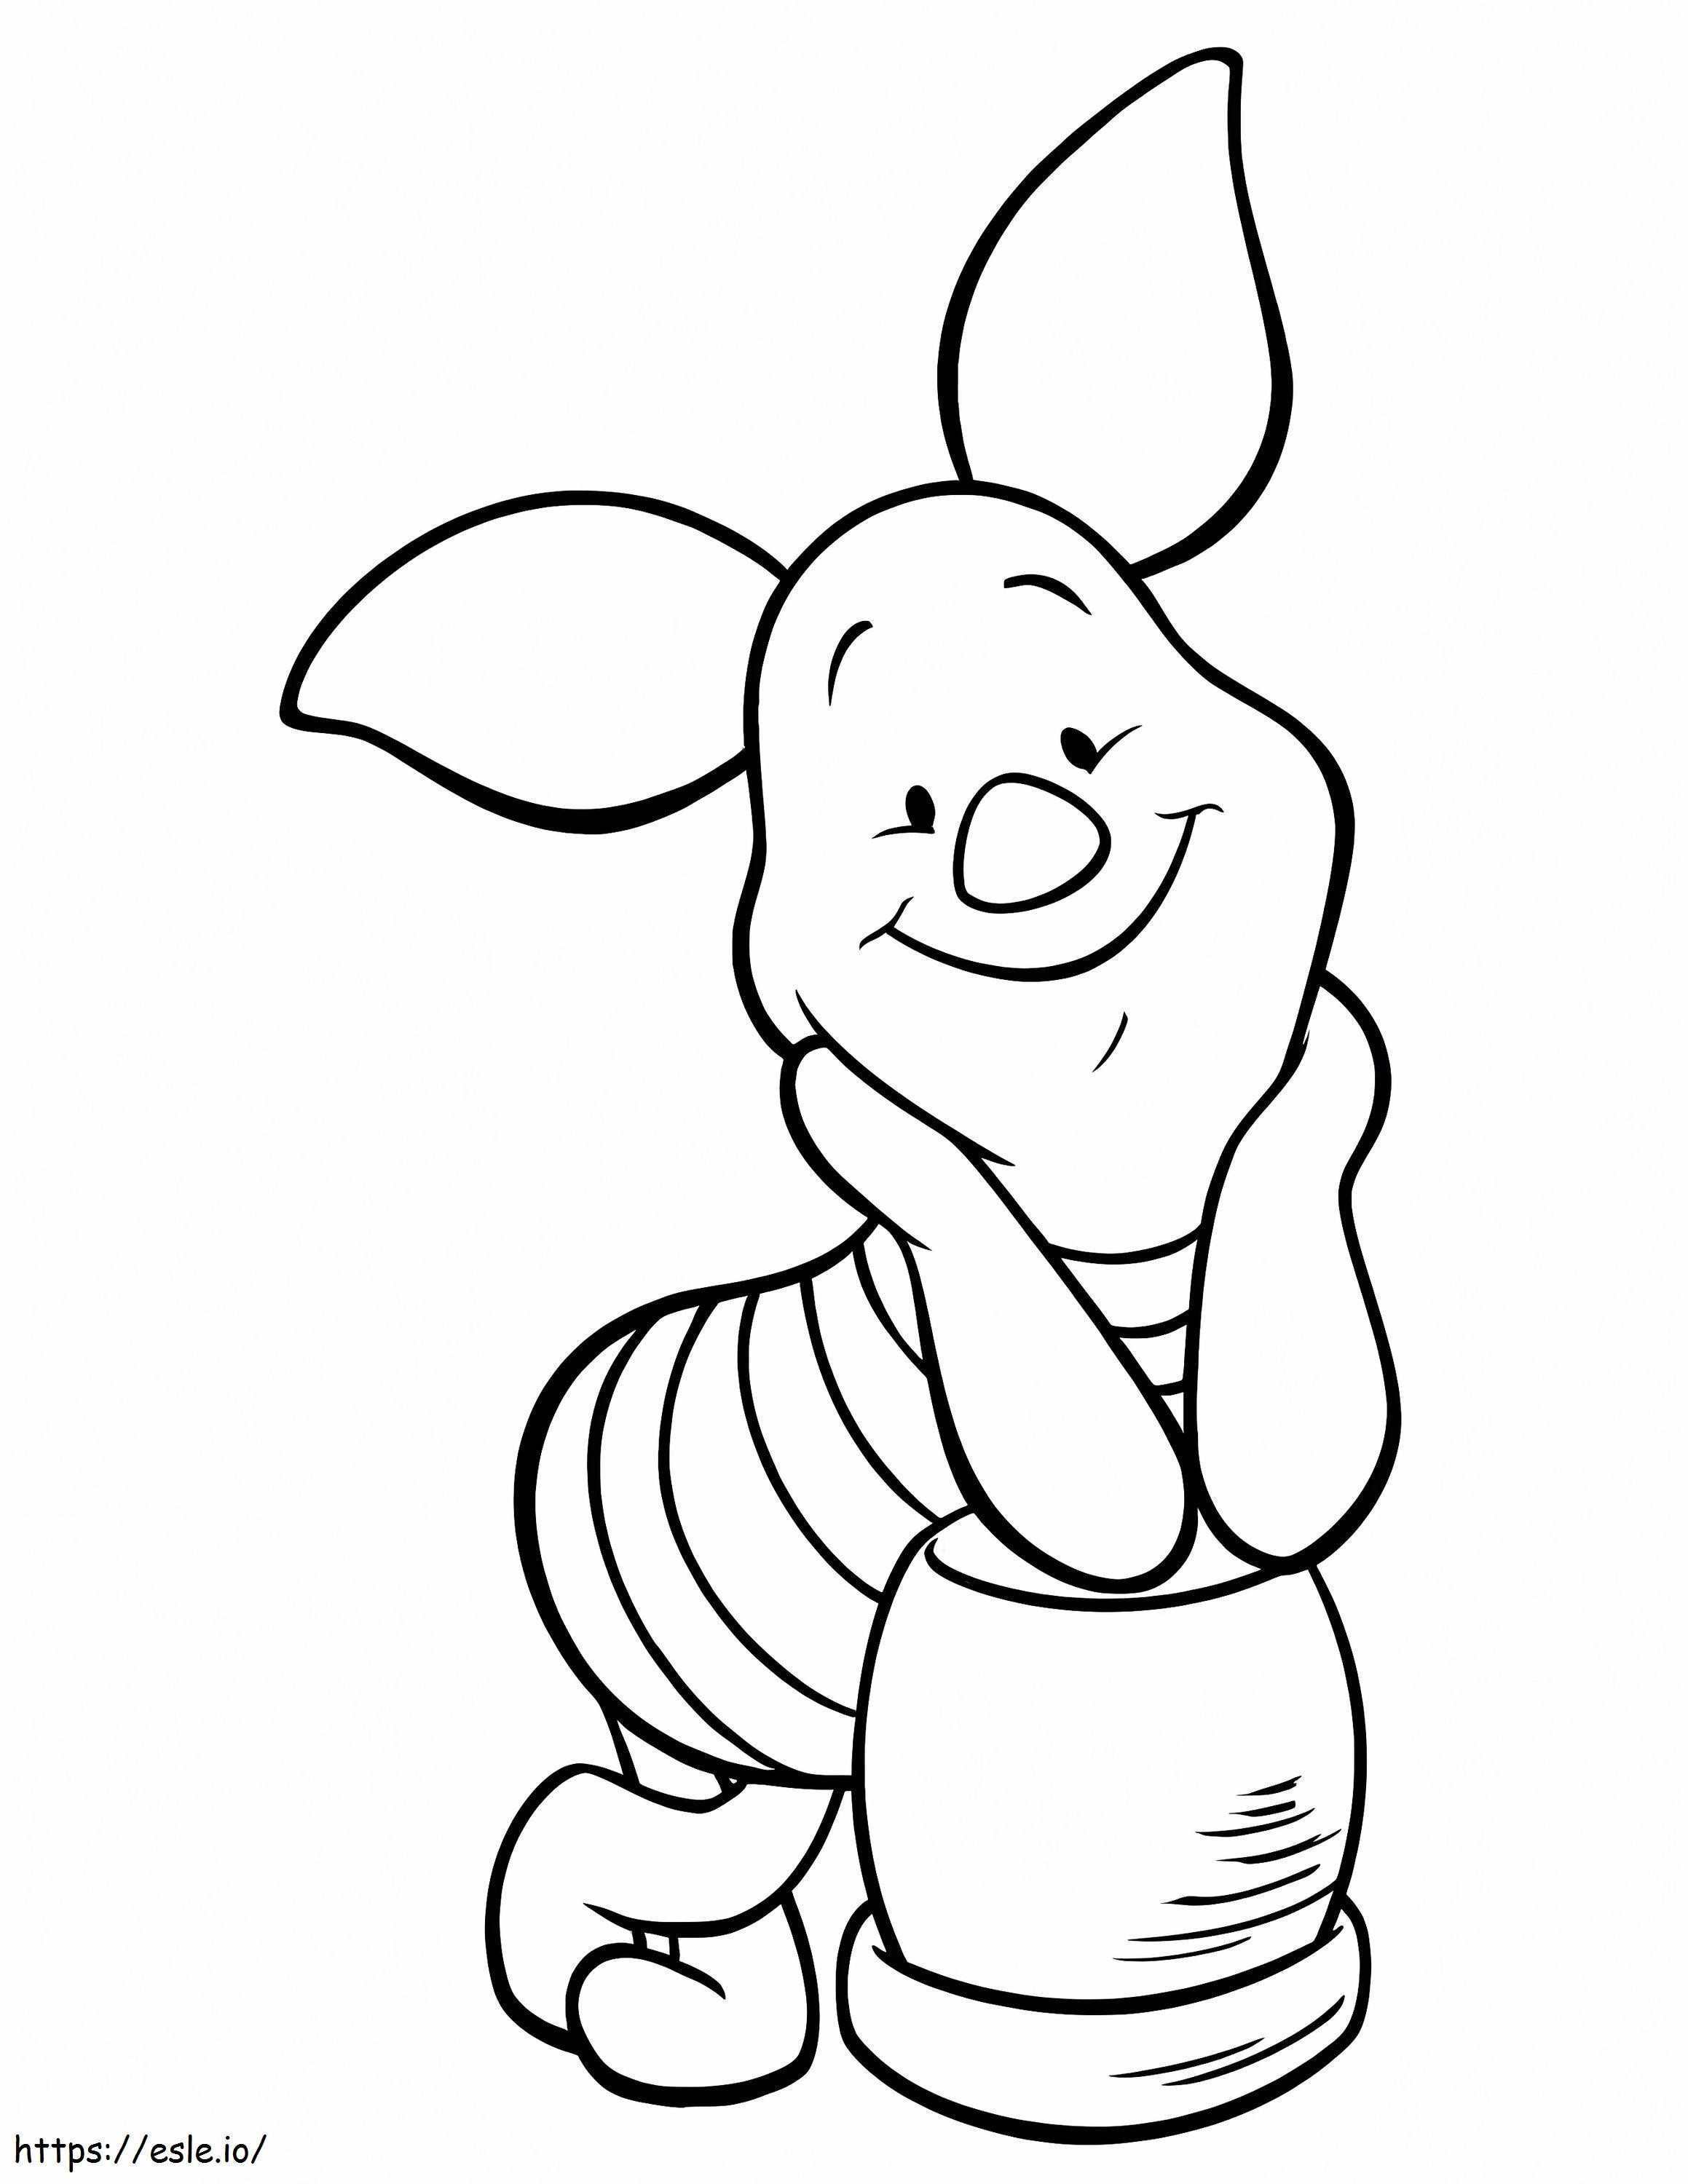 Basic Sucker coloring page